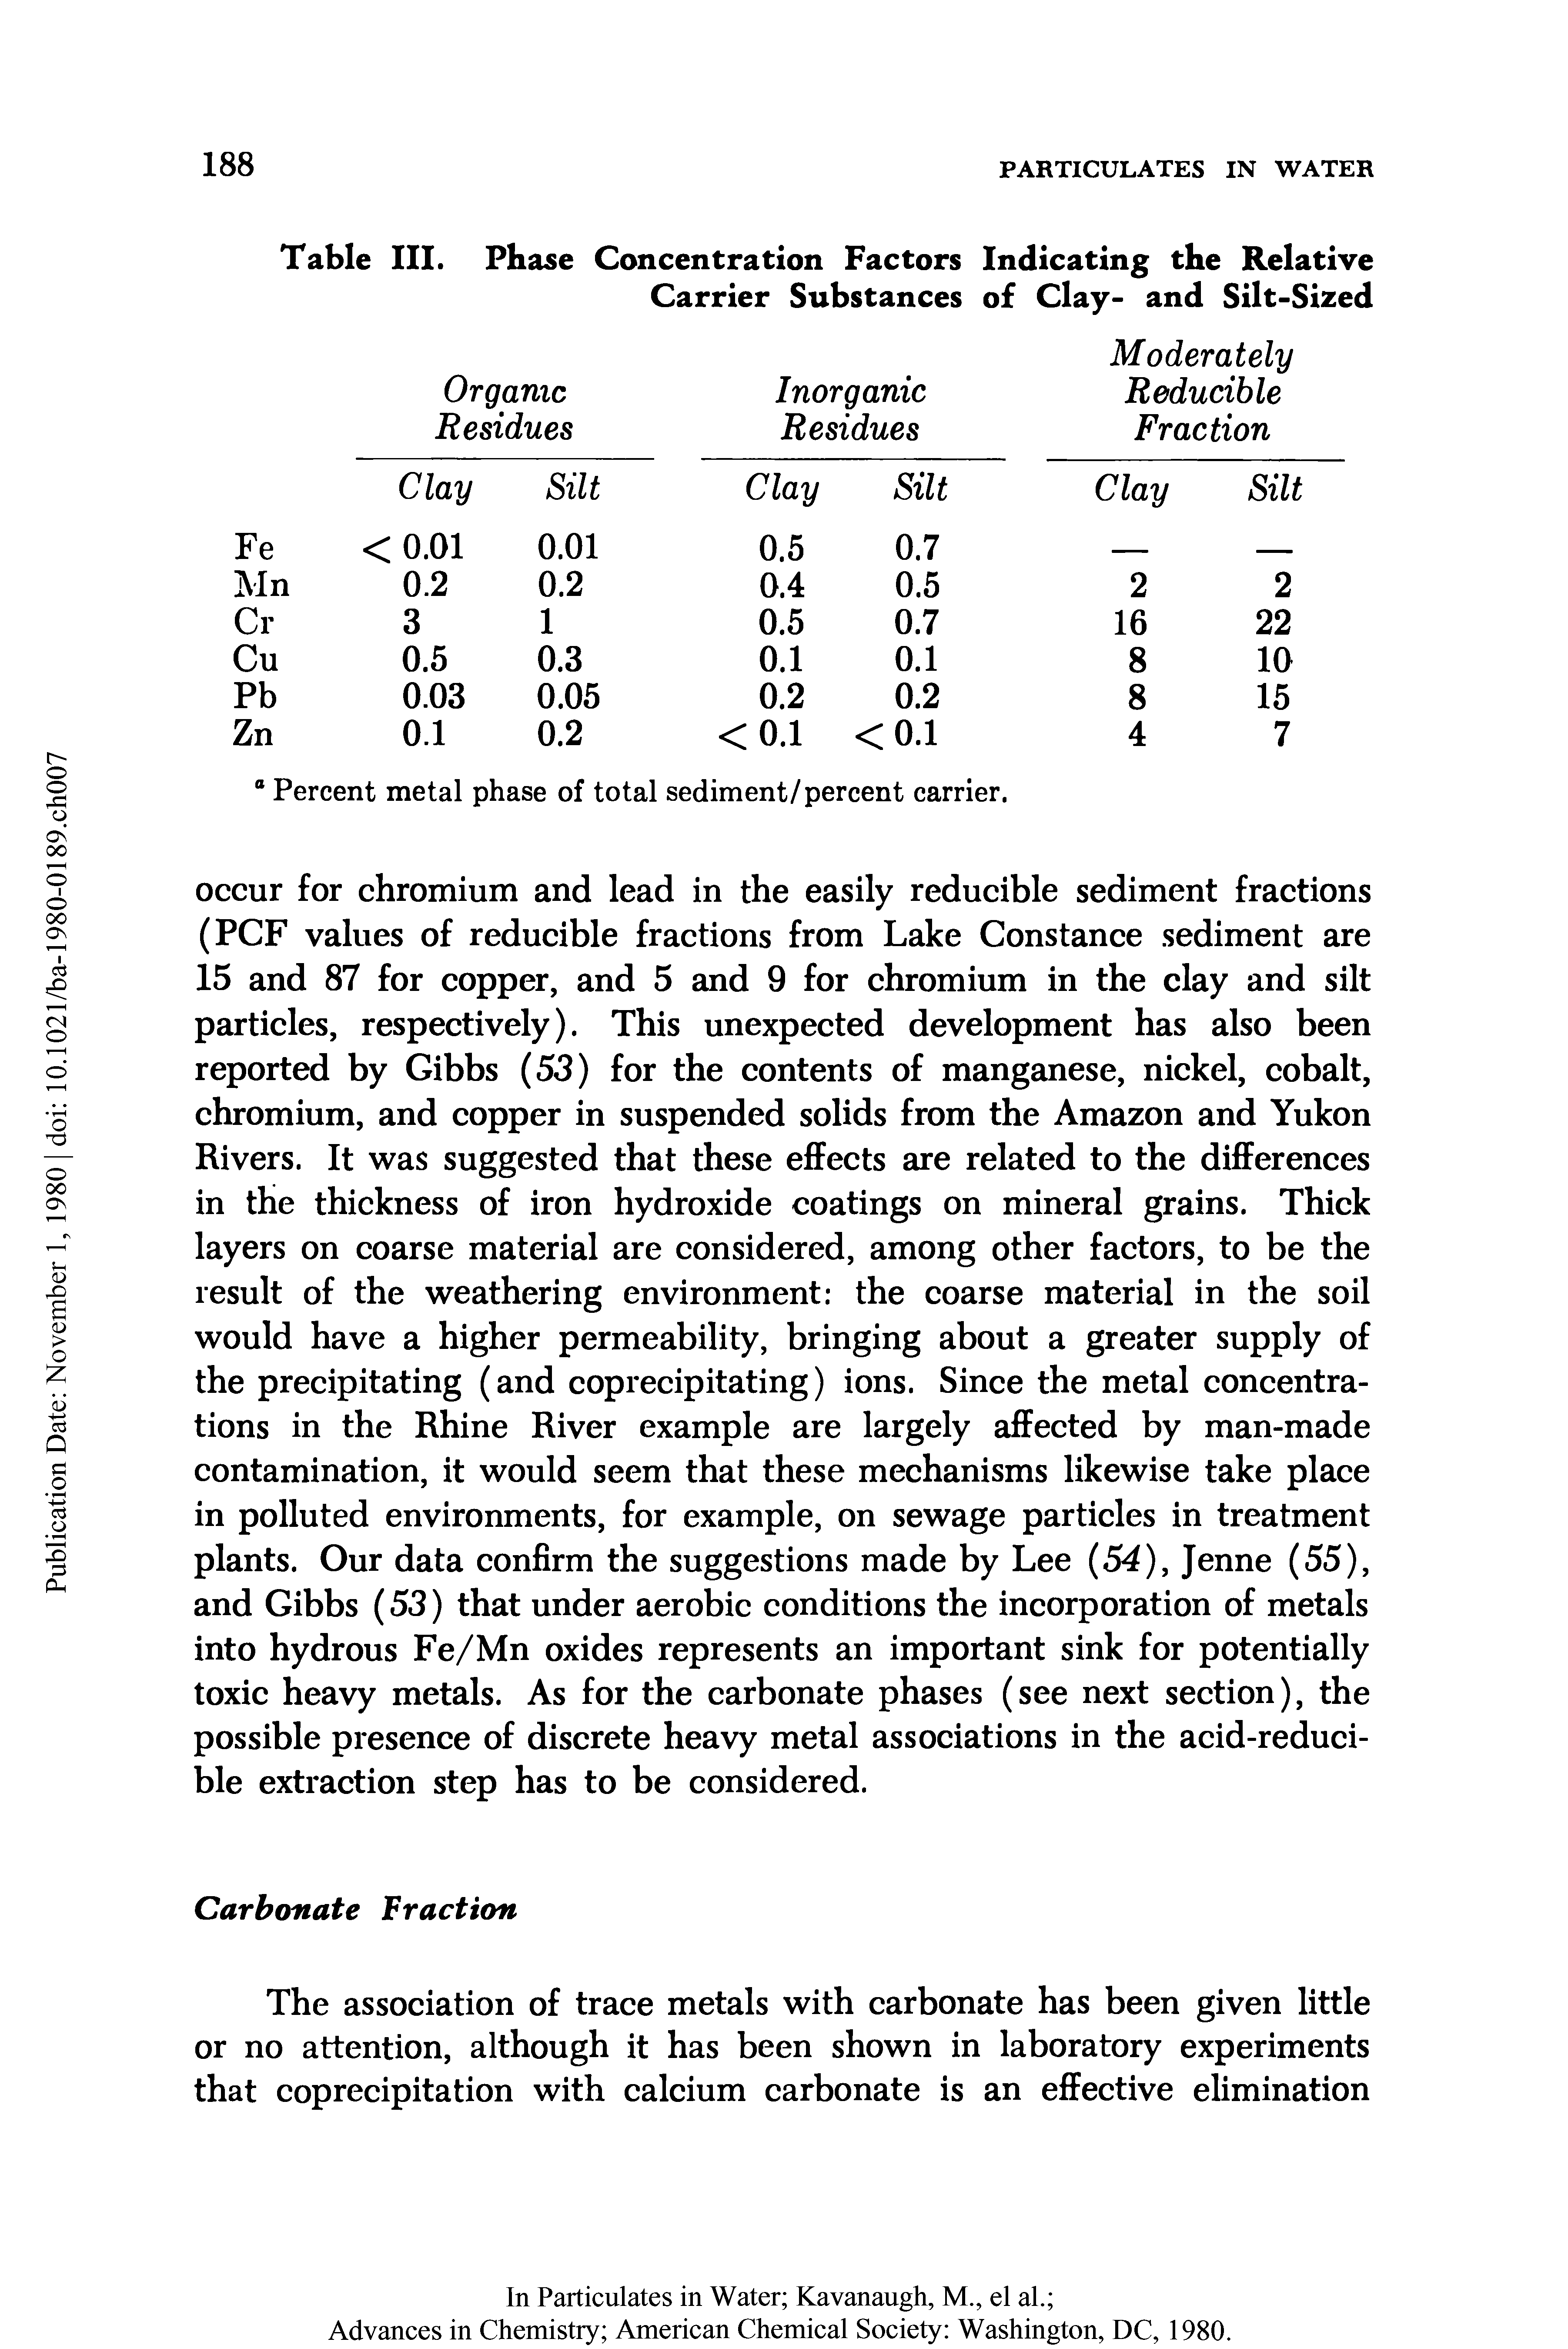 Table III. Phase Concentration Factors Indicating the Relative Carrier Substances of Clay- and Silt-Sized...